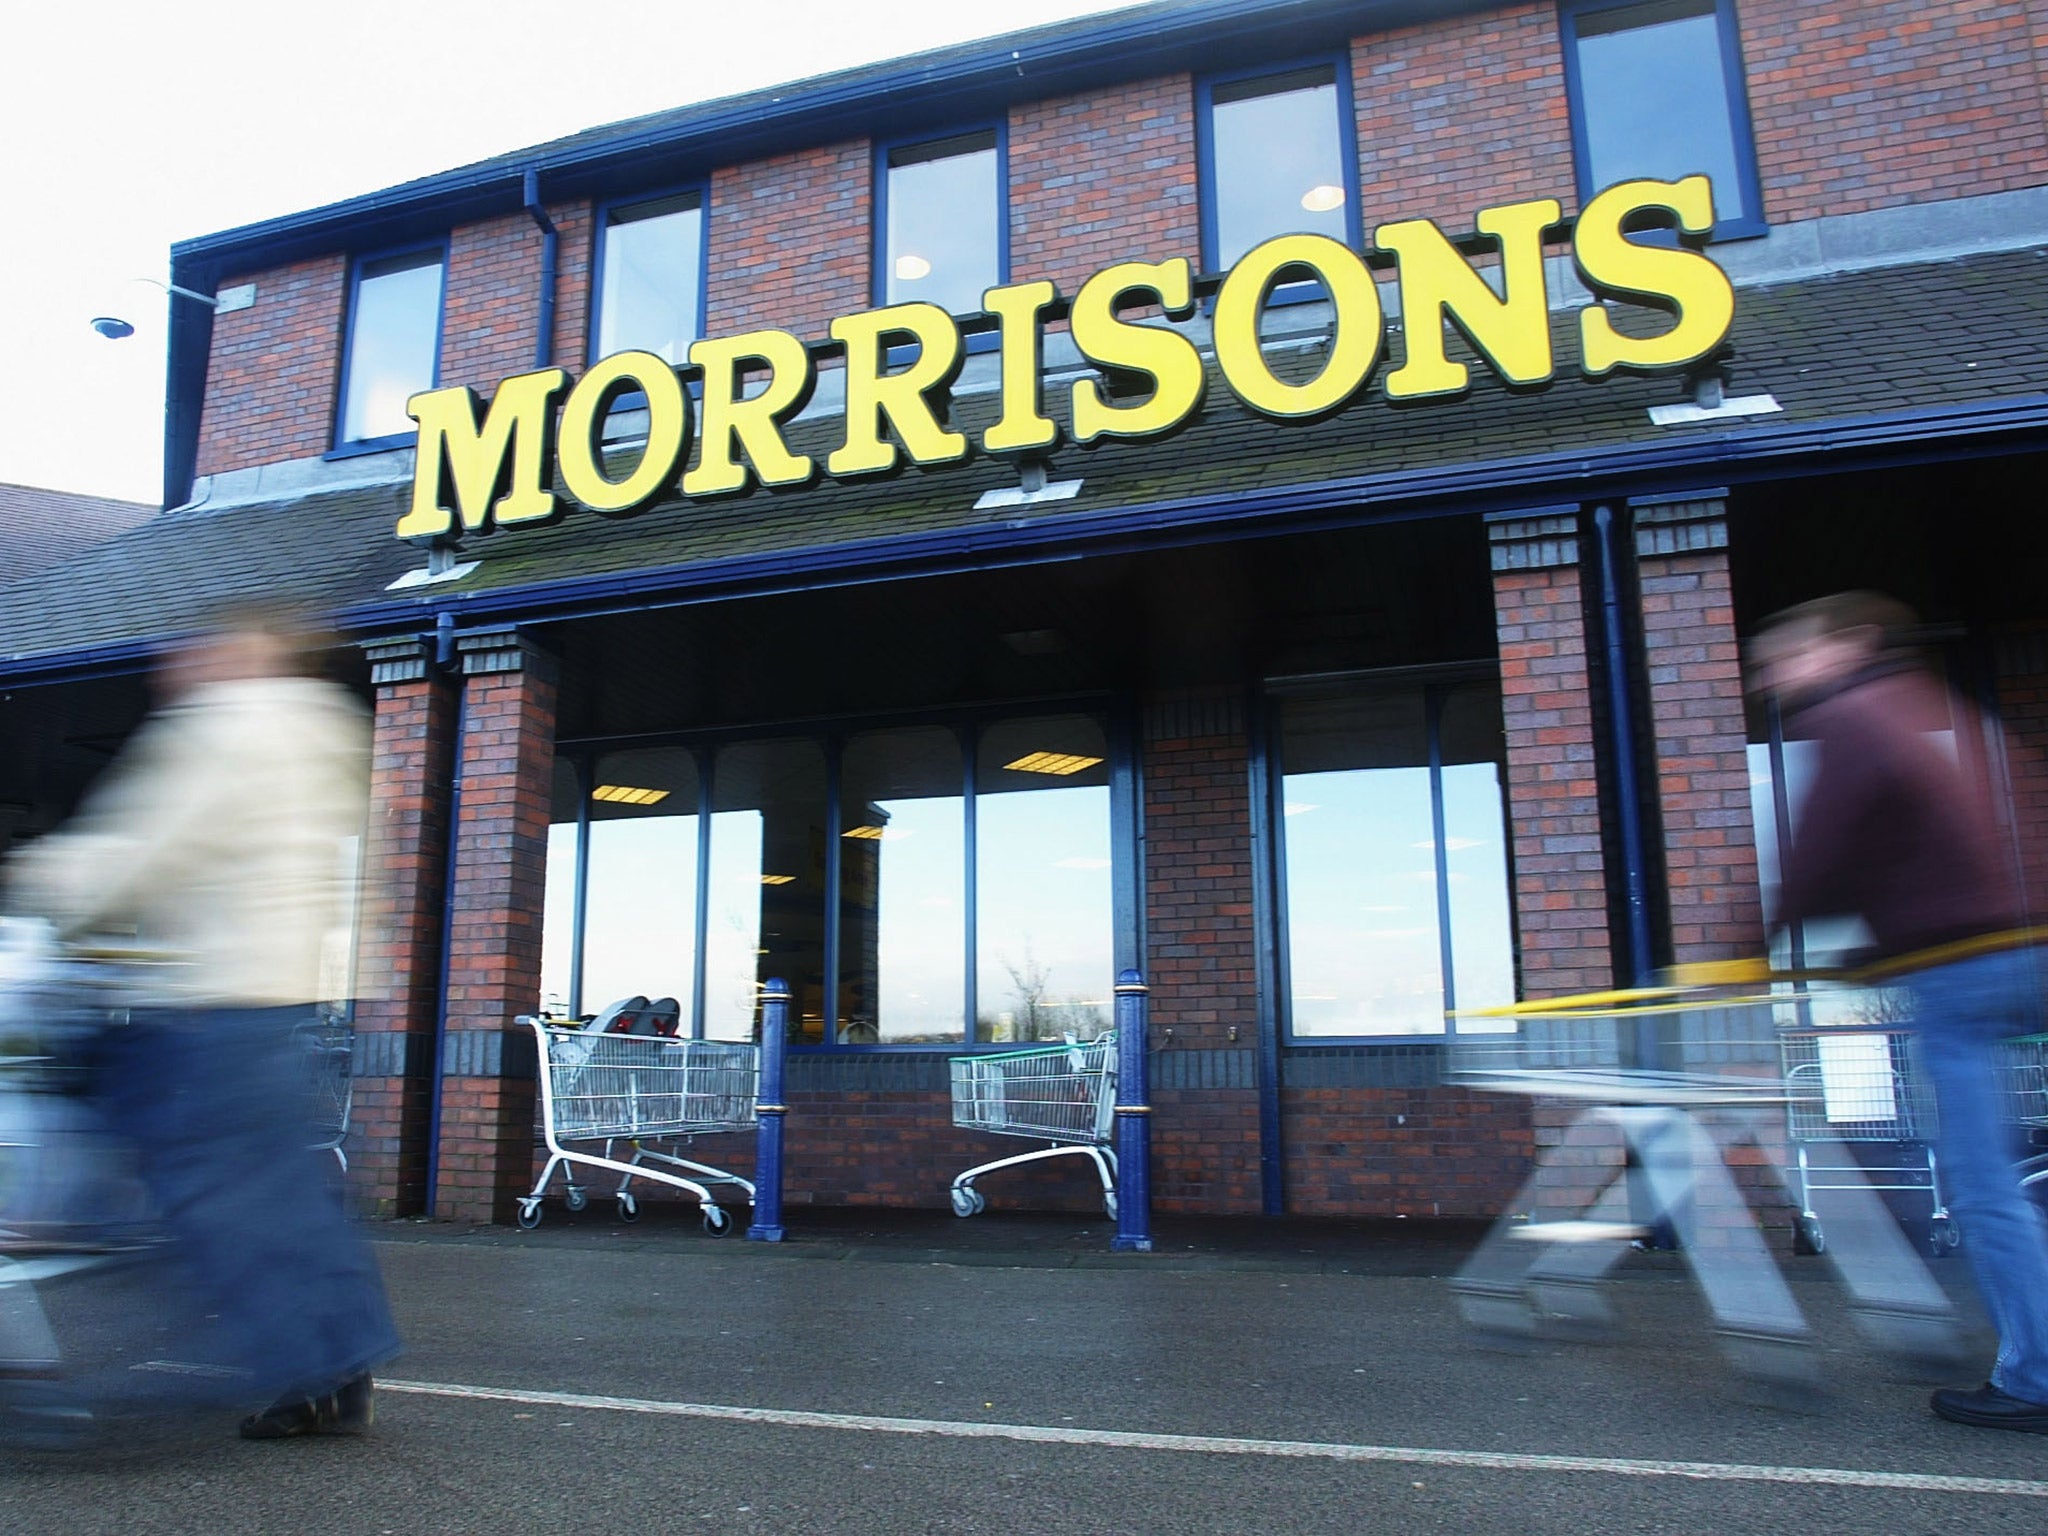 Morrisons reported its first sales rise in 18 months